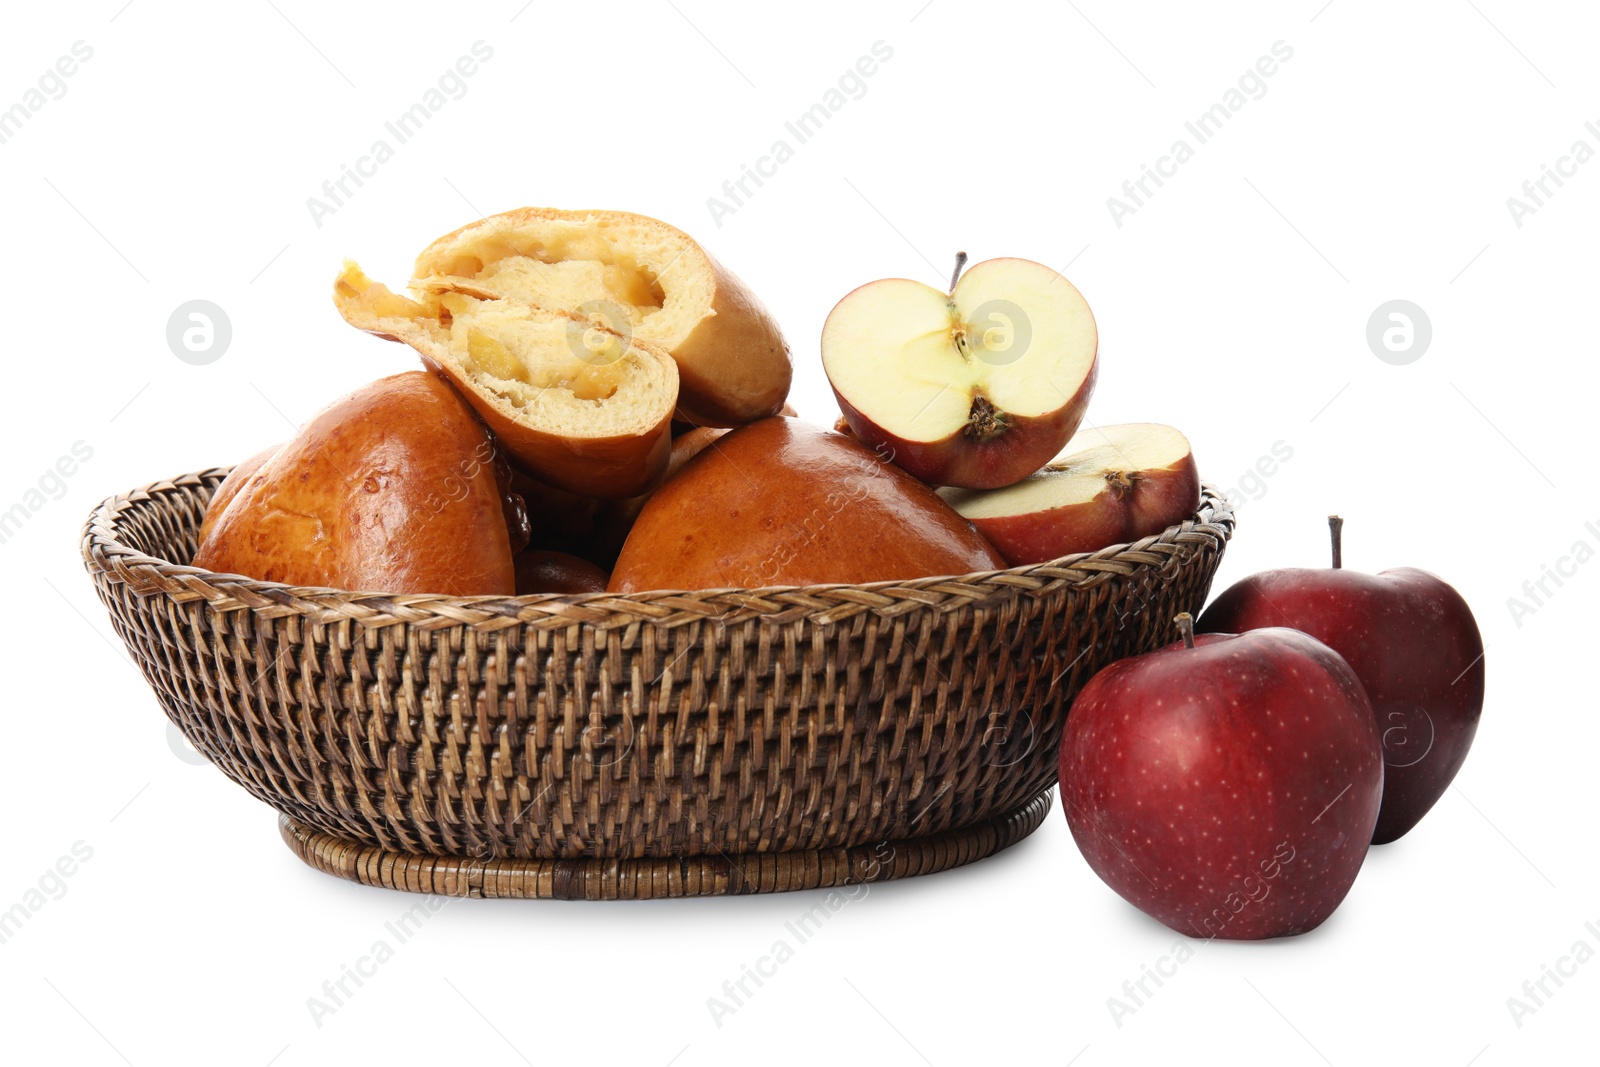 Photo of Delicious baked apple pirozhki in wicker basket and fruits on white background